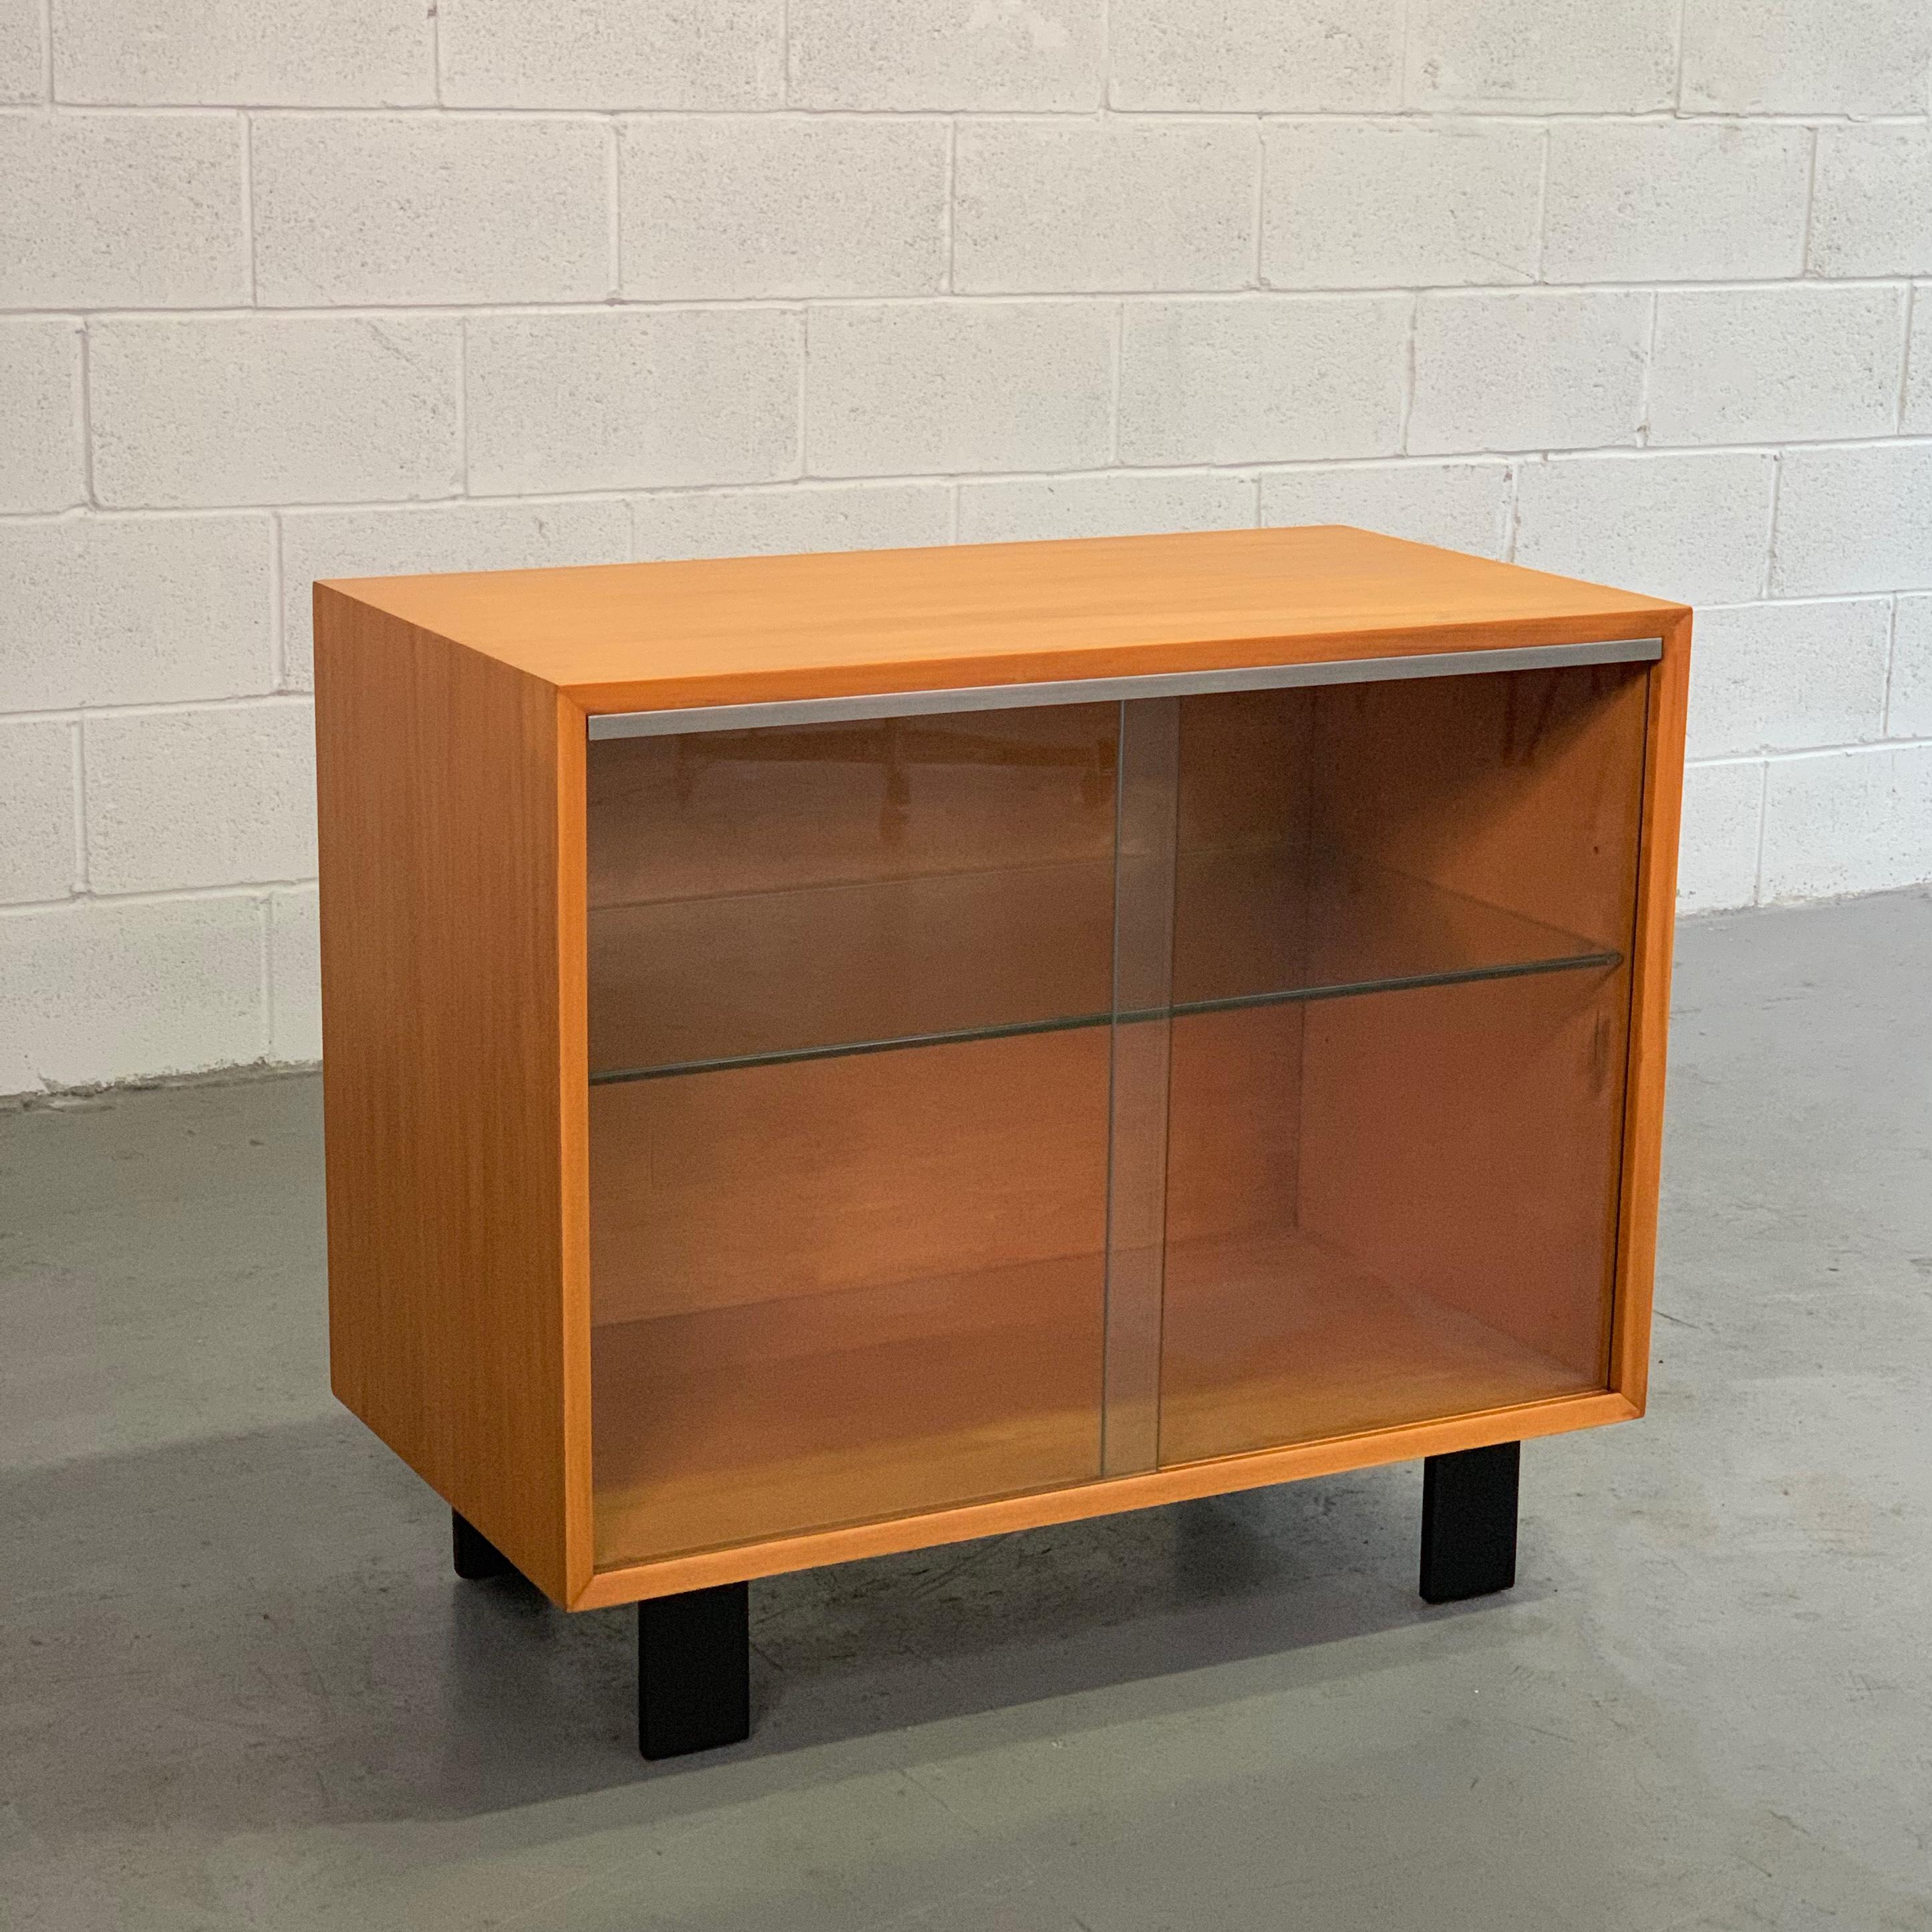 Mid-Century Modern, natural birch cabinet by George Nelson for Herman Miller features sliding glass door fronts with contrasting black lacquered legs. There is one interior glass shelf. The cabinet itself is 24 inches ht.